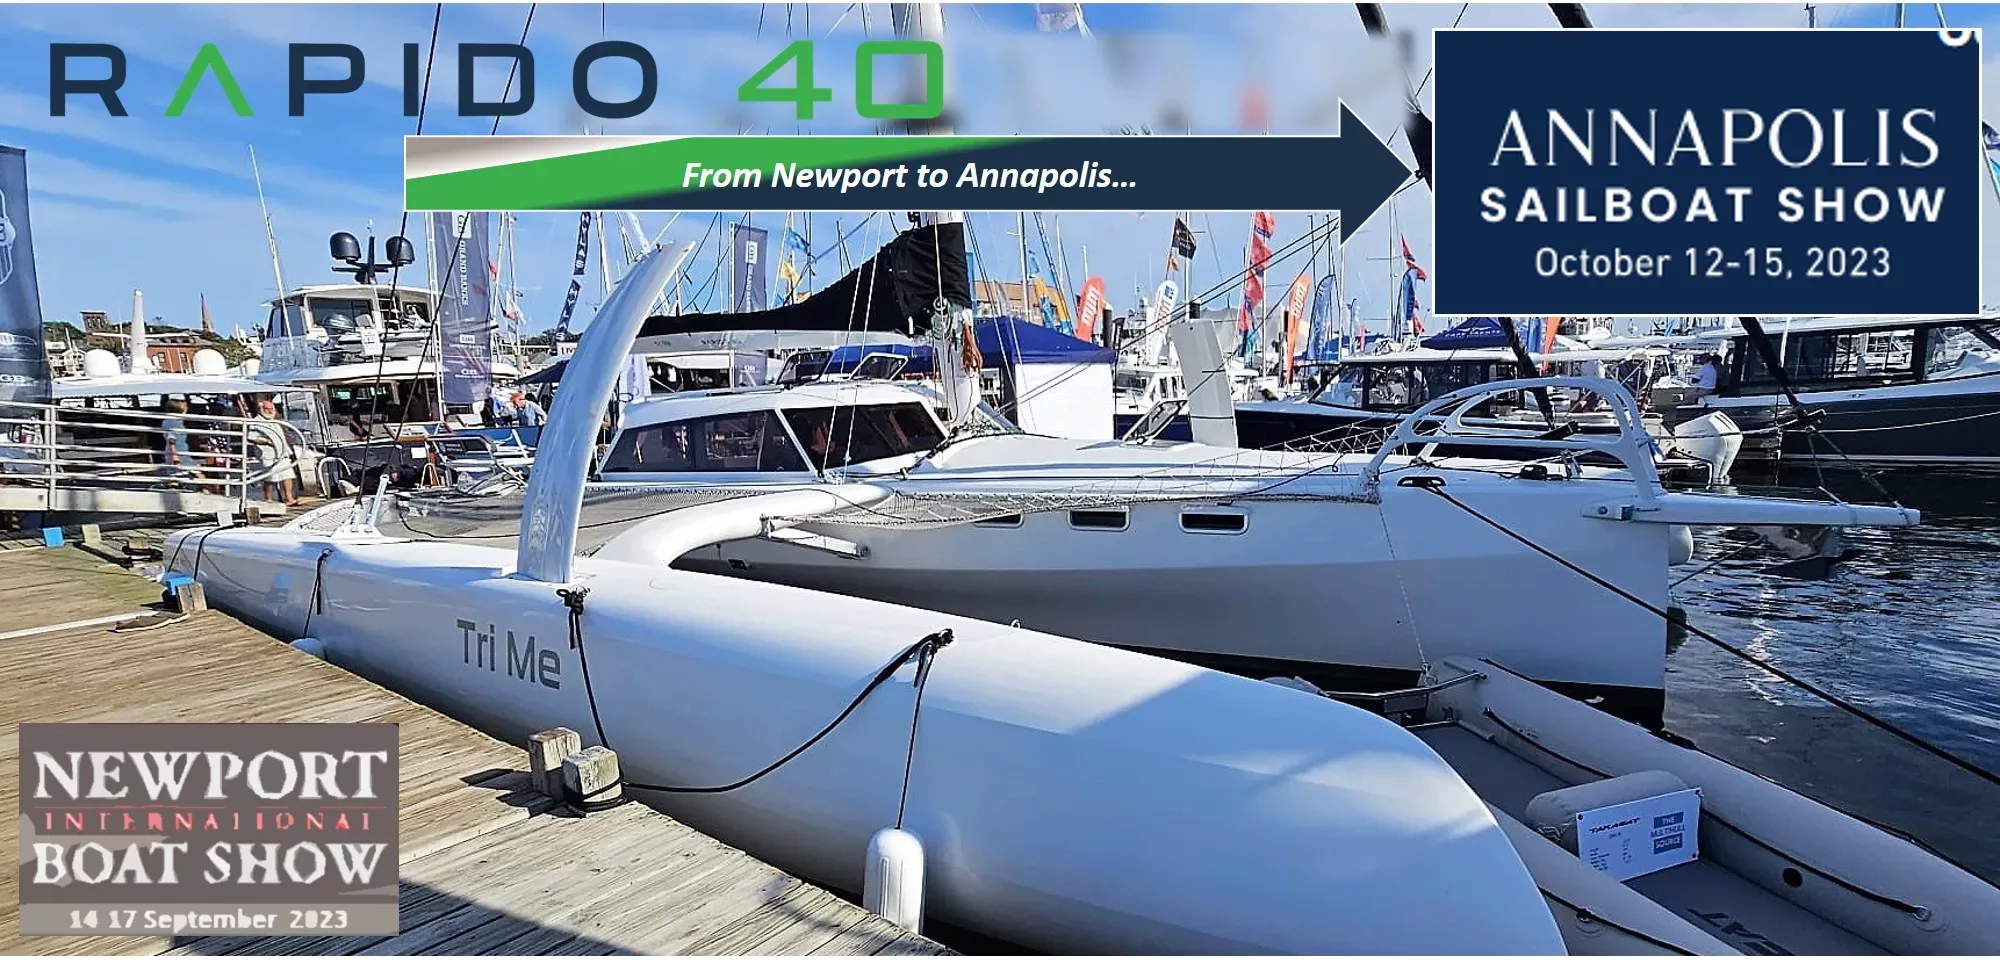 Rapido 40 at Annapolis Boat Show, USA, 12-15 October 2023